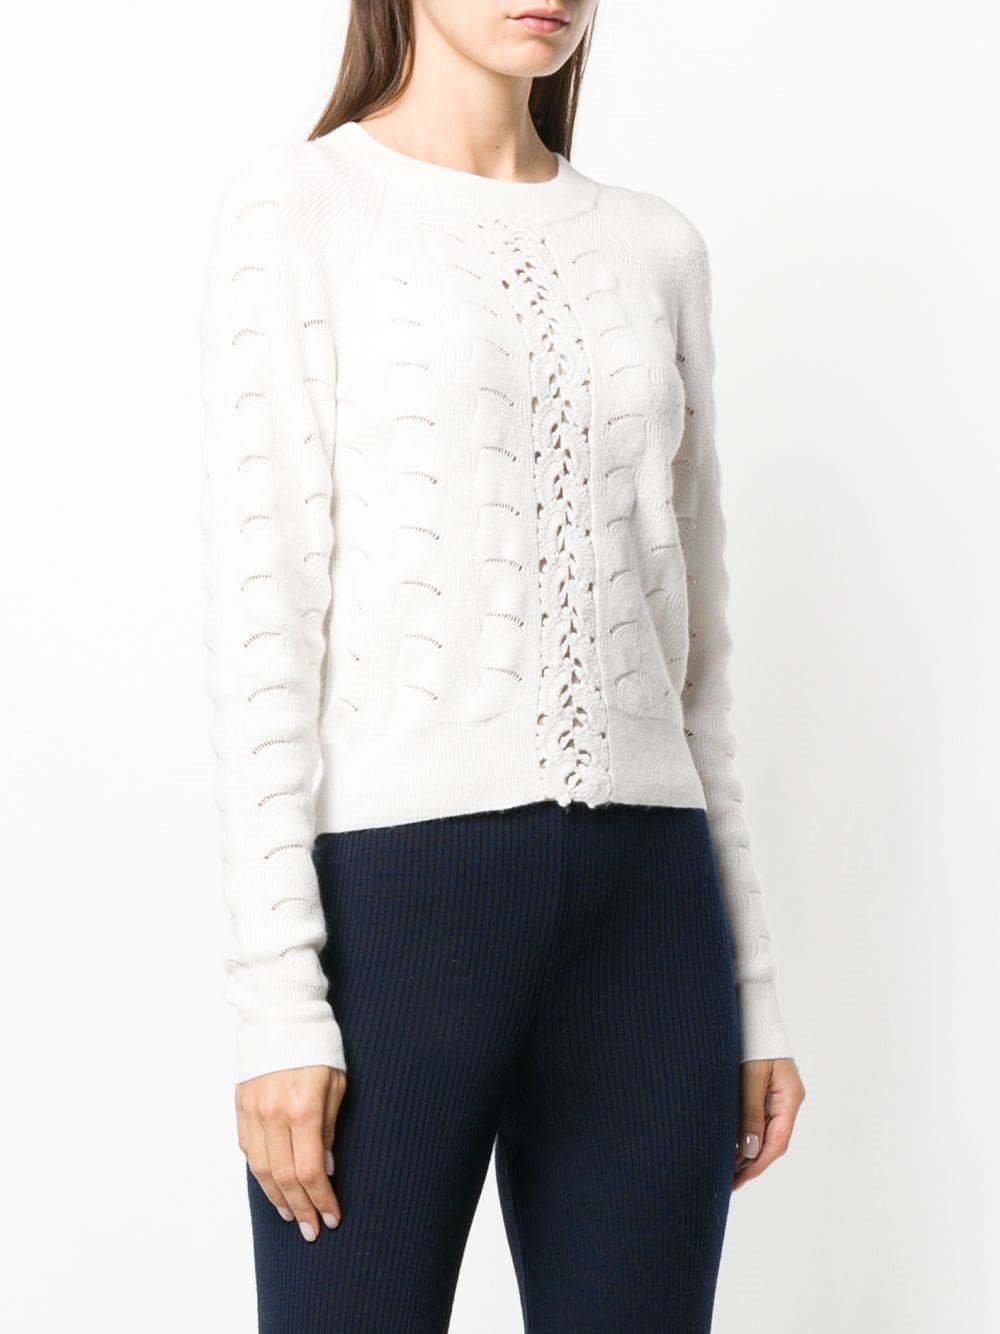 see by chloe` EMBROIDERED MOTIF SWEATER available on montiboutique.com ...